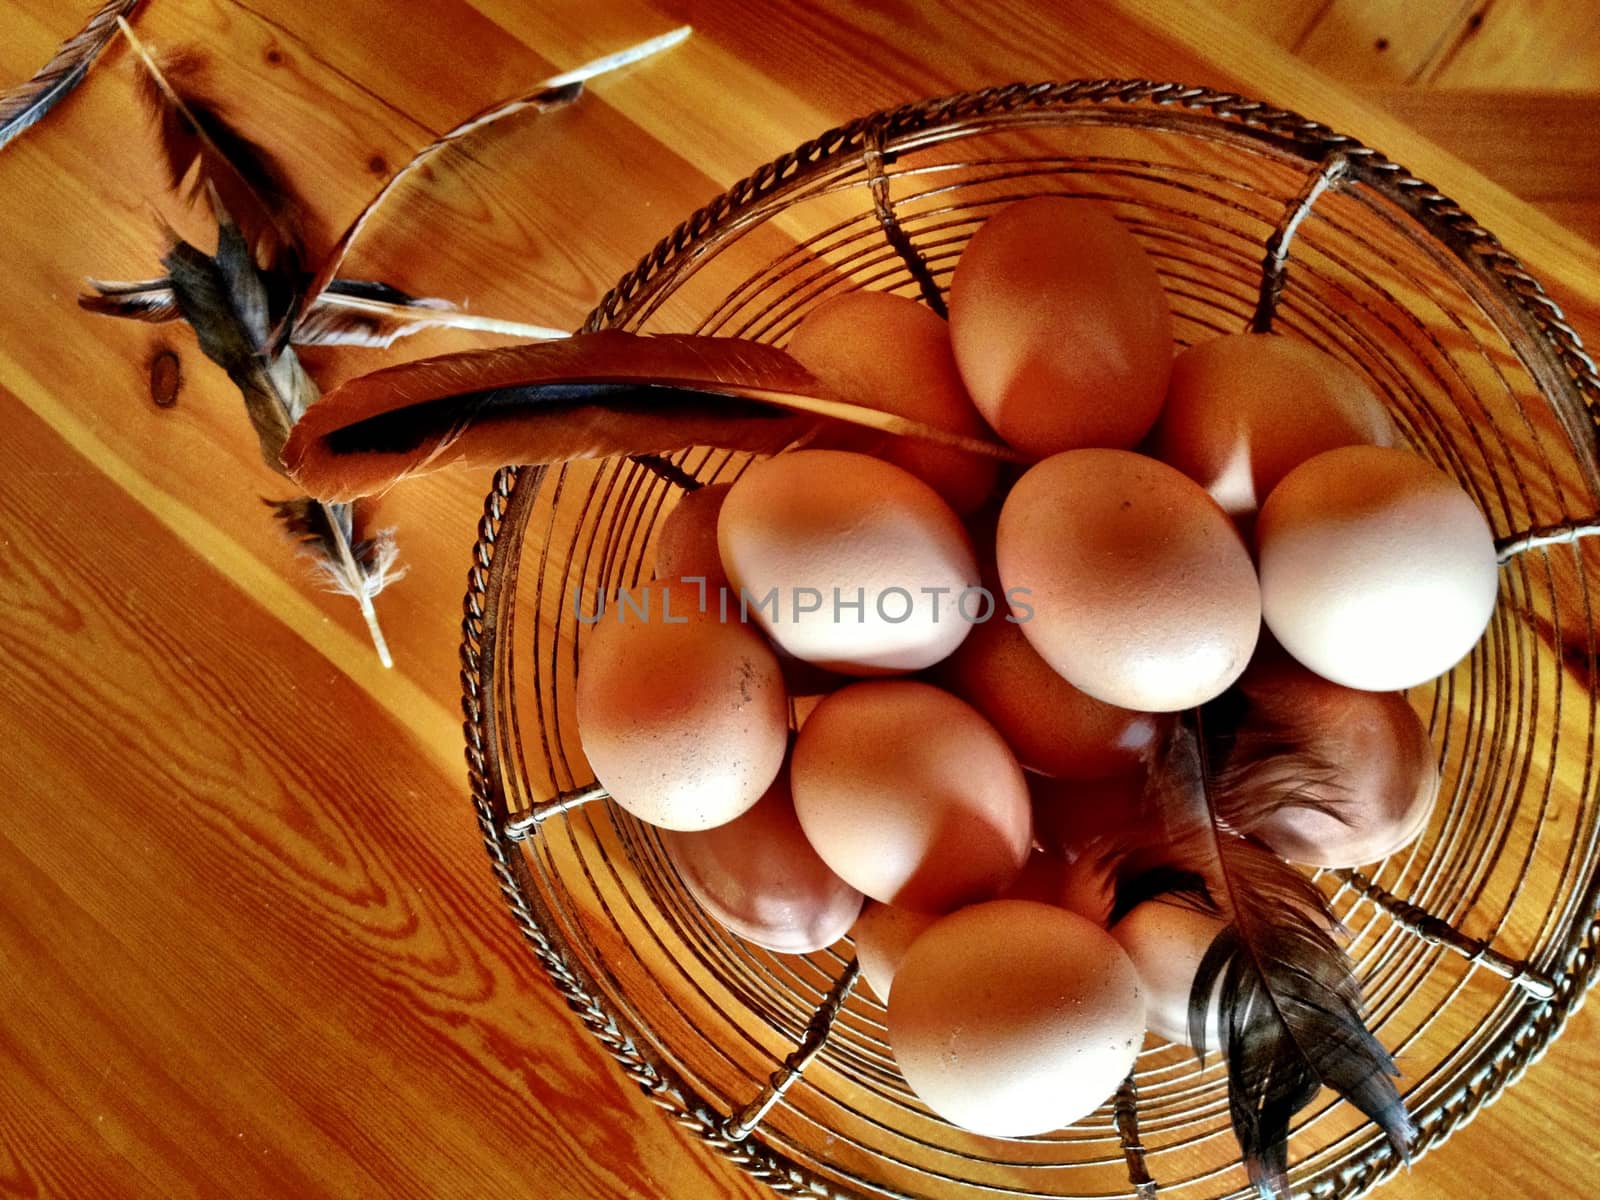 eggs in the backet, shoot taken from above